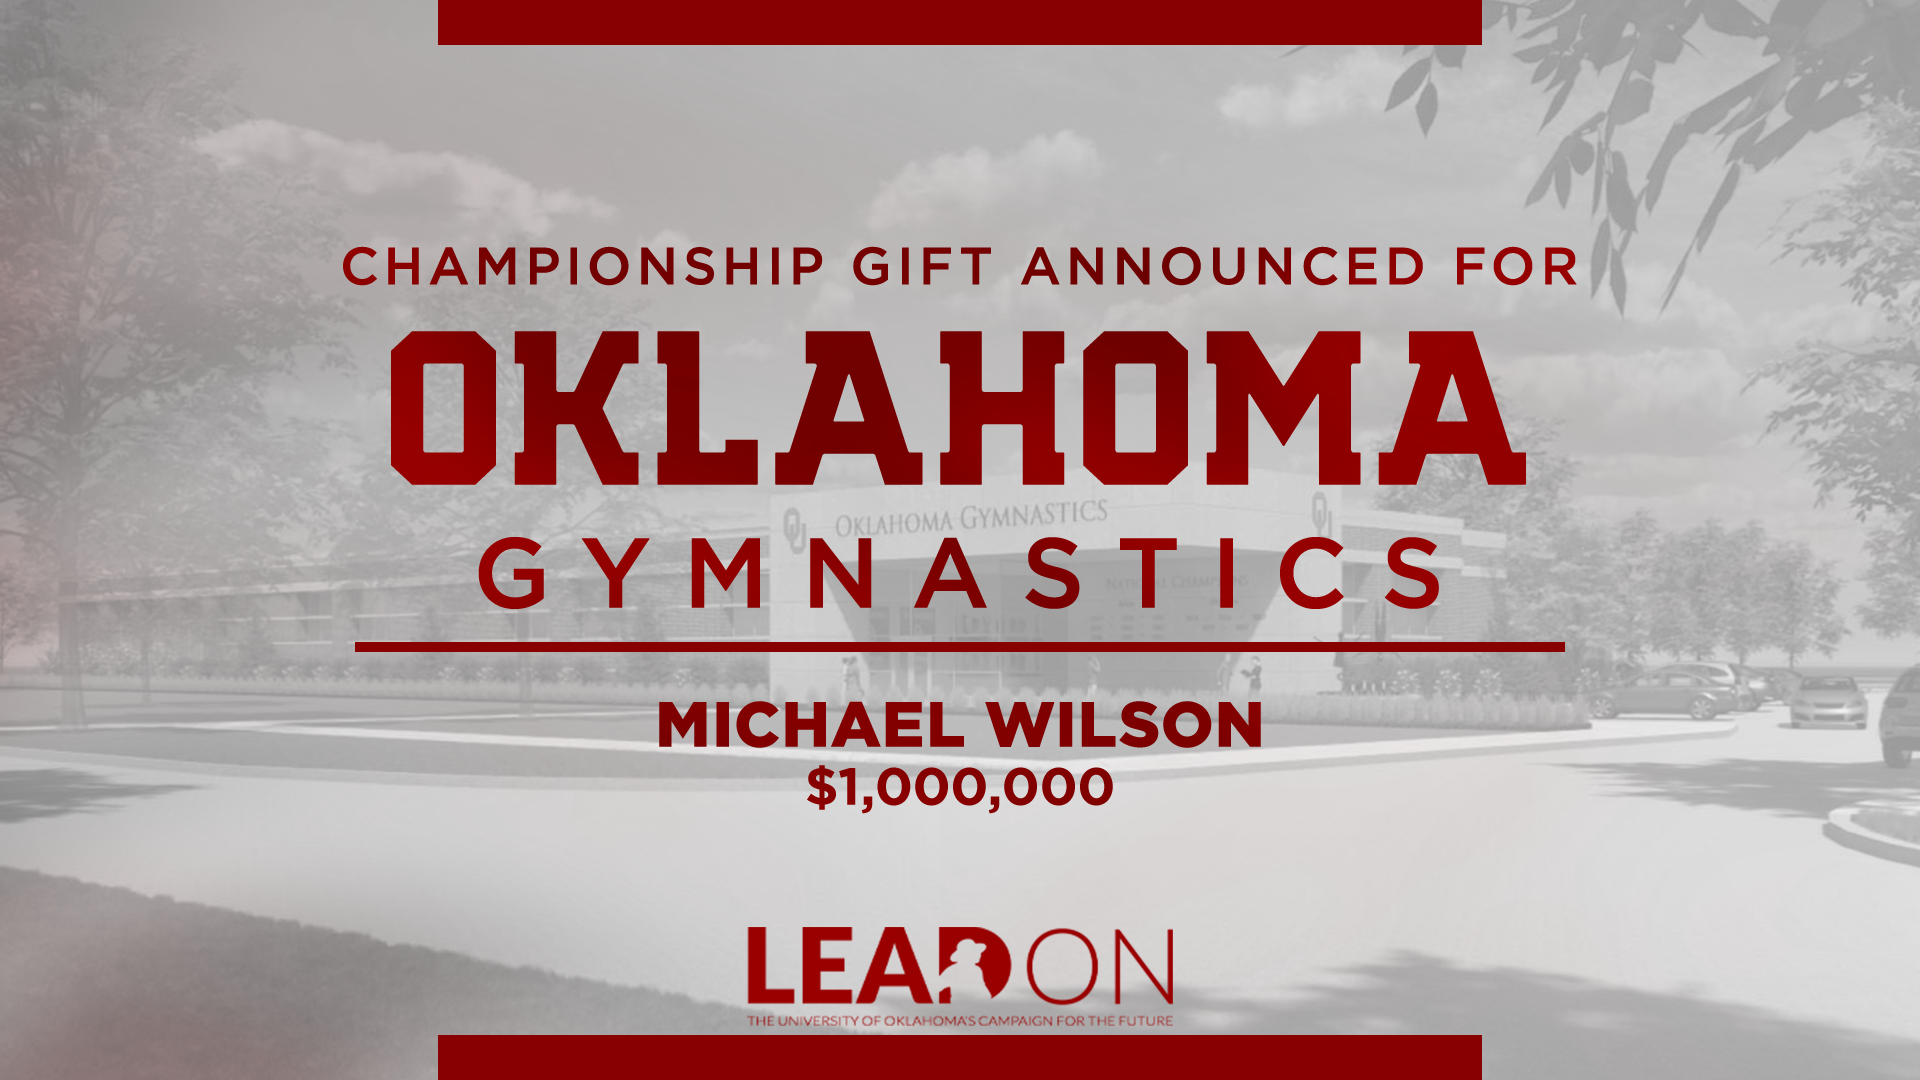 Gift announced for Oklahoma gymnastics training center expansion and renovation.